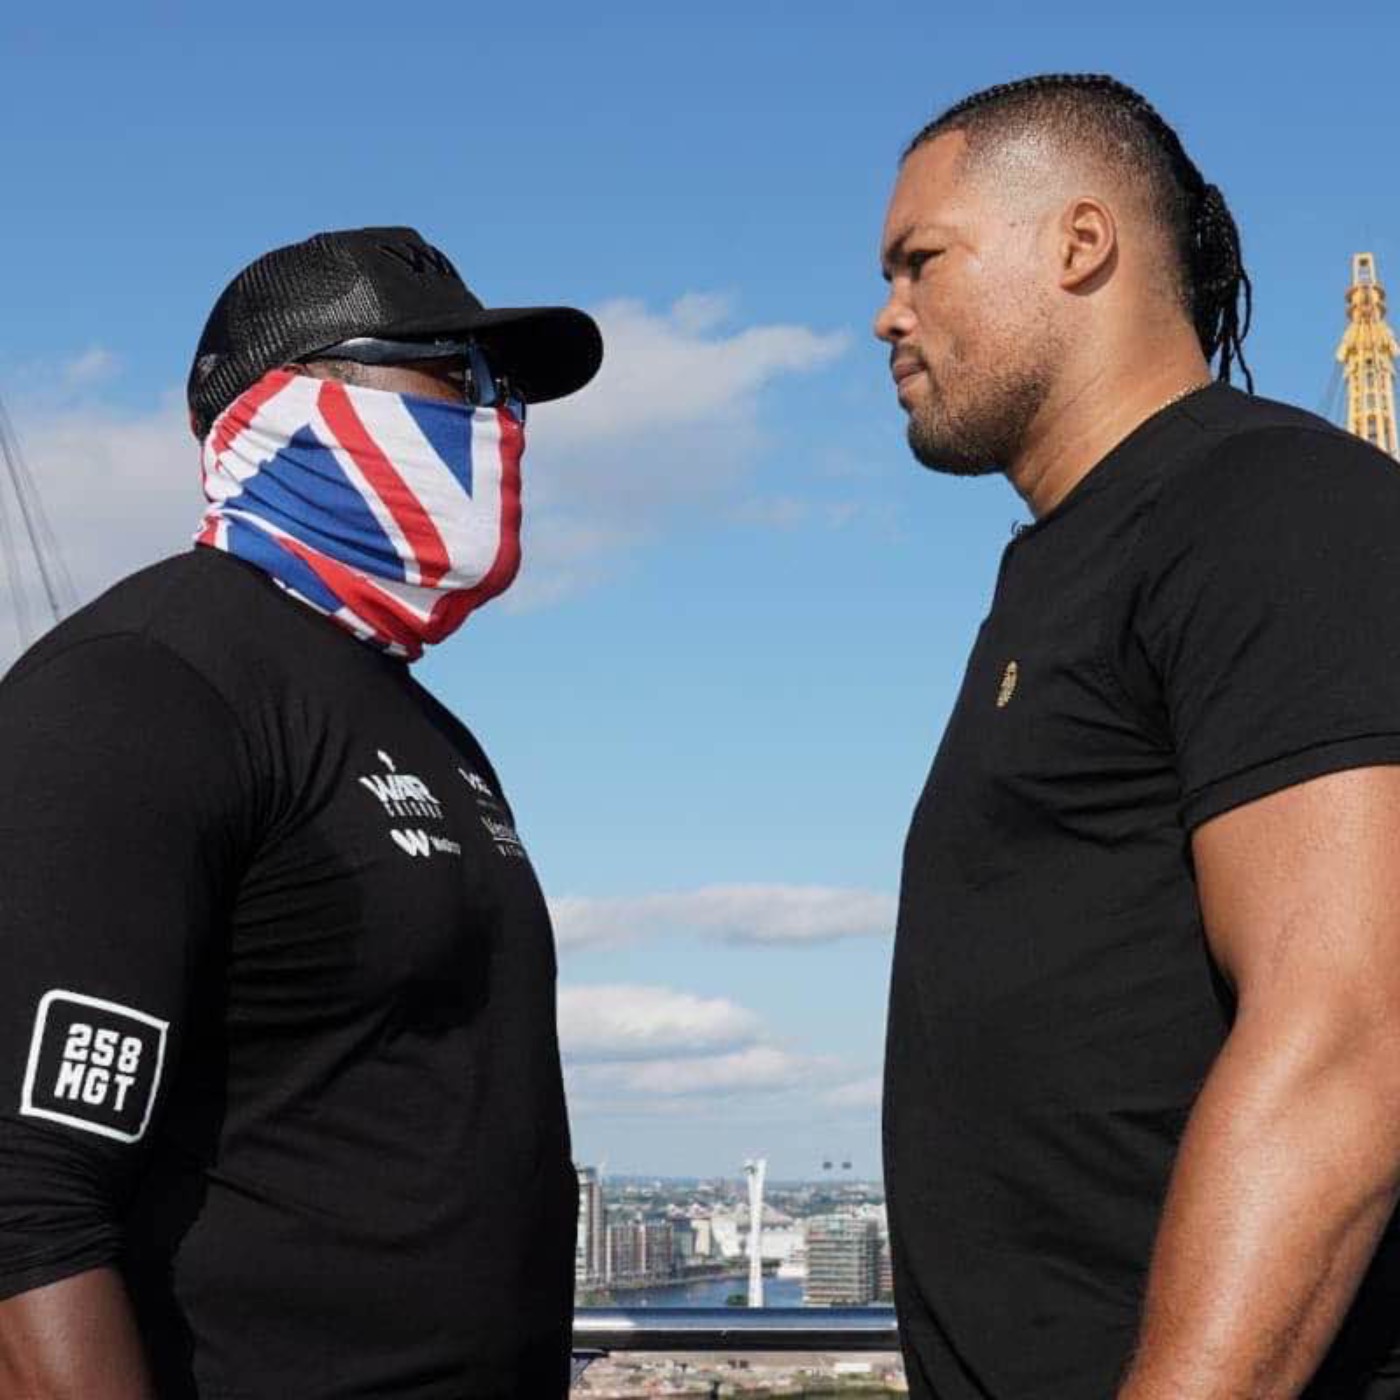 BOXING PREVIEW: Joyce vs Chisora and it's undercard.